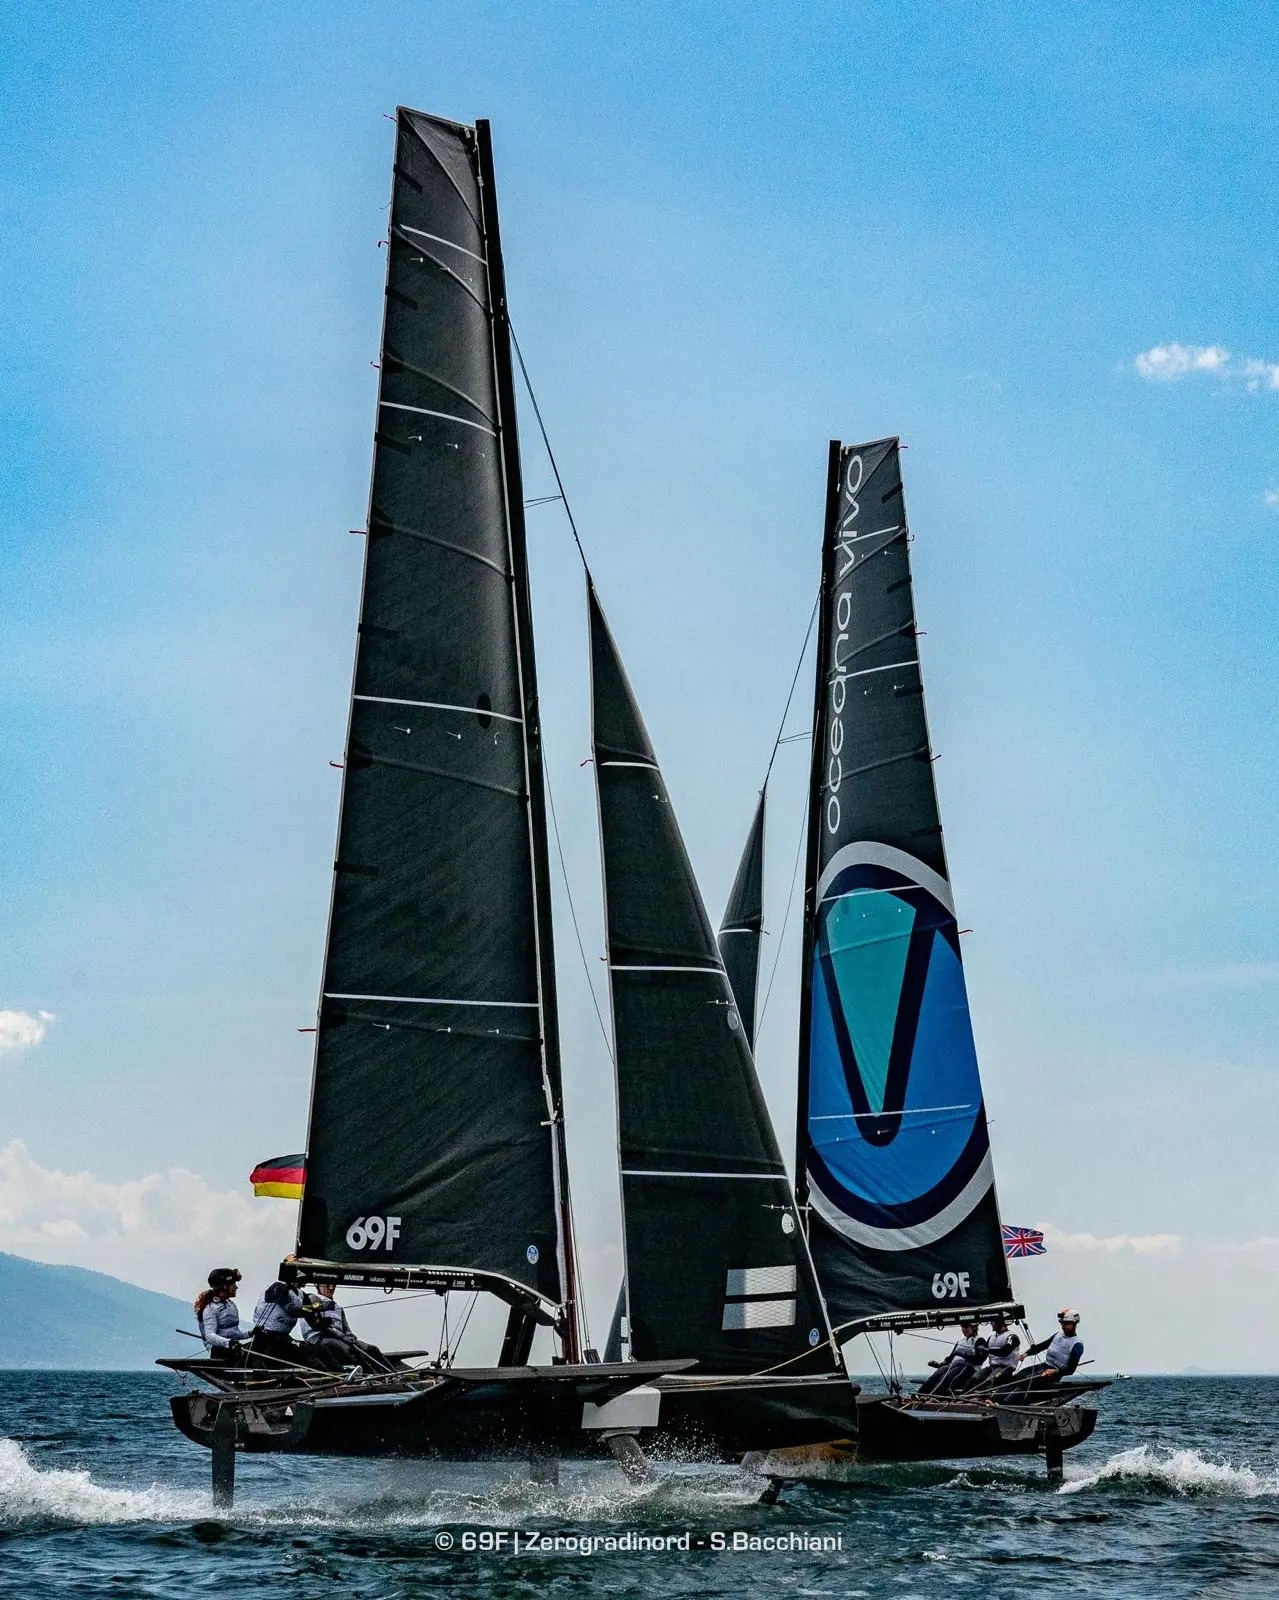  Persico 69F - Youth Gold Cup - Torbole ITA - Final results